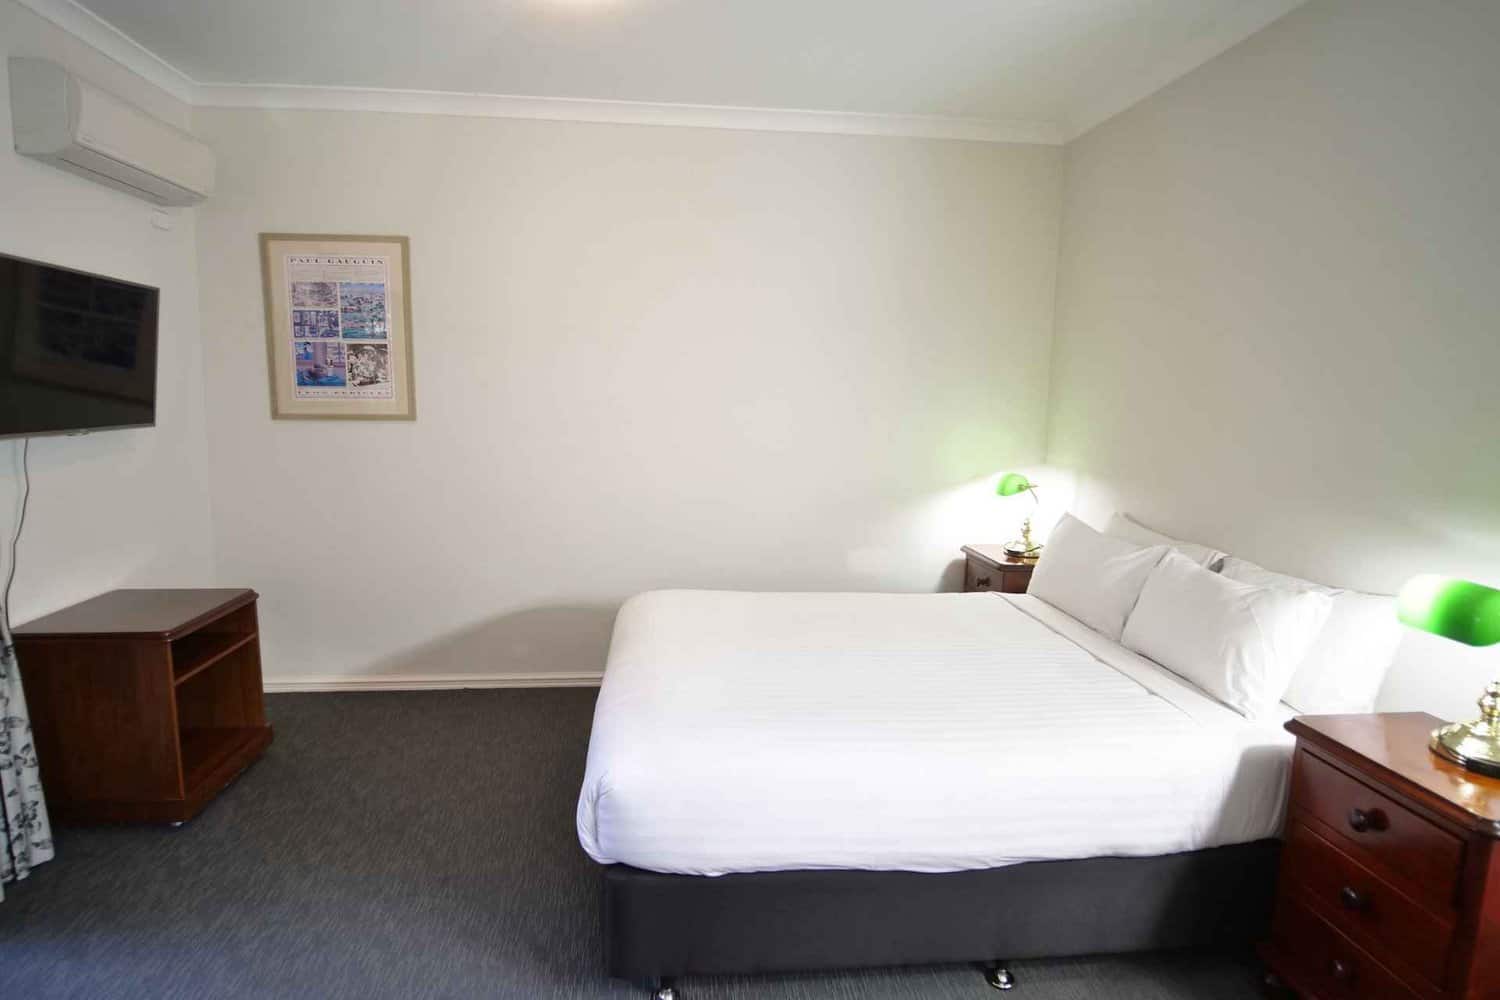 Spacious hotel room featuring a comfortable queen-size bed, flanked by bedside tables with lamps, a wall-mounted TV for entertainment, air conditioning for climate control, and an eye-catching painting on the wall, creating a relaxing atmosphere for guests during their stay